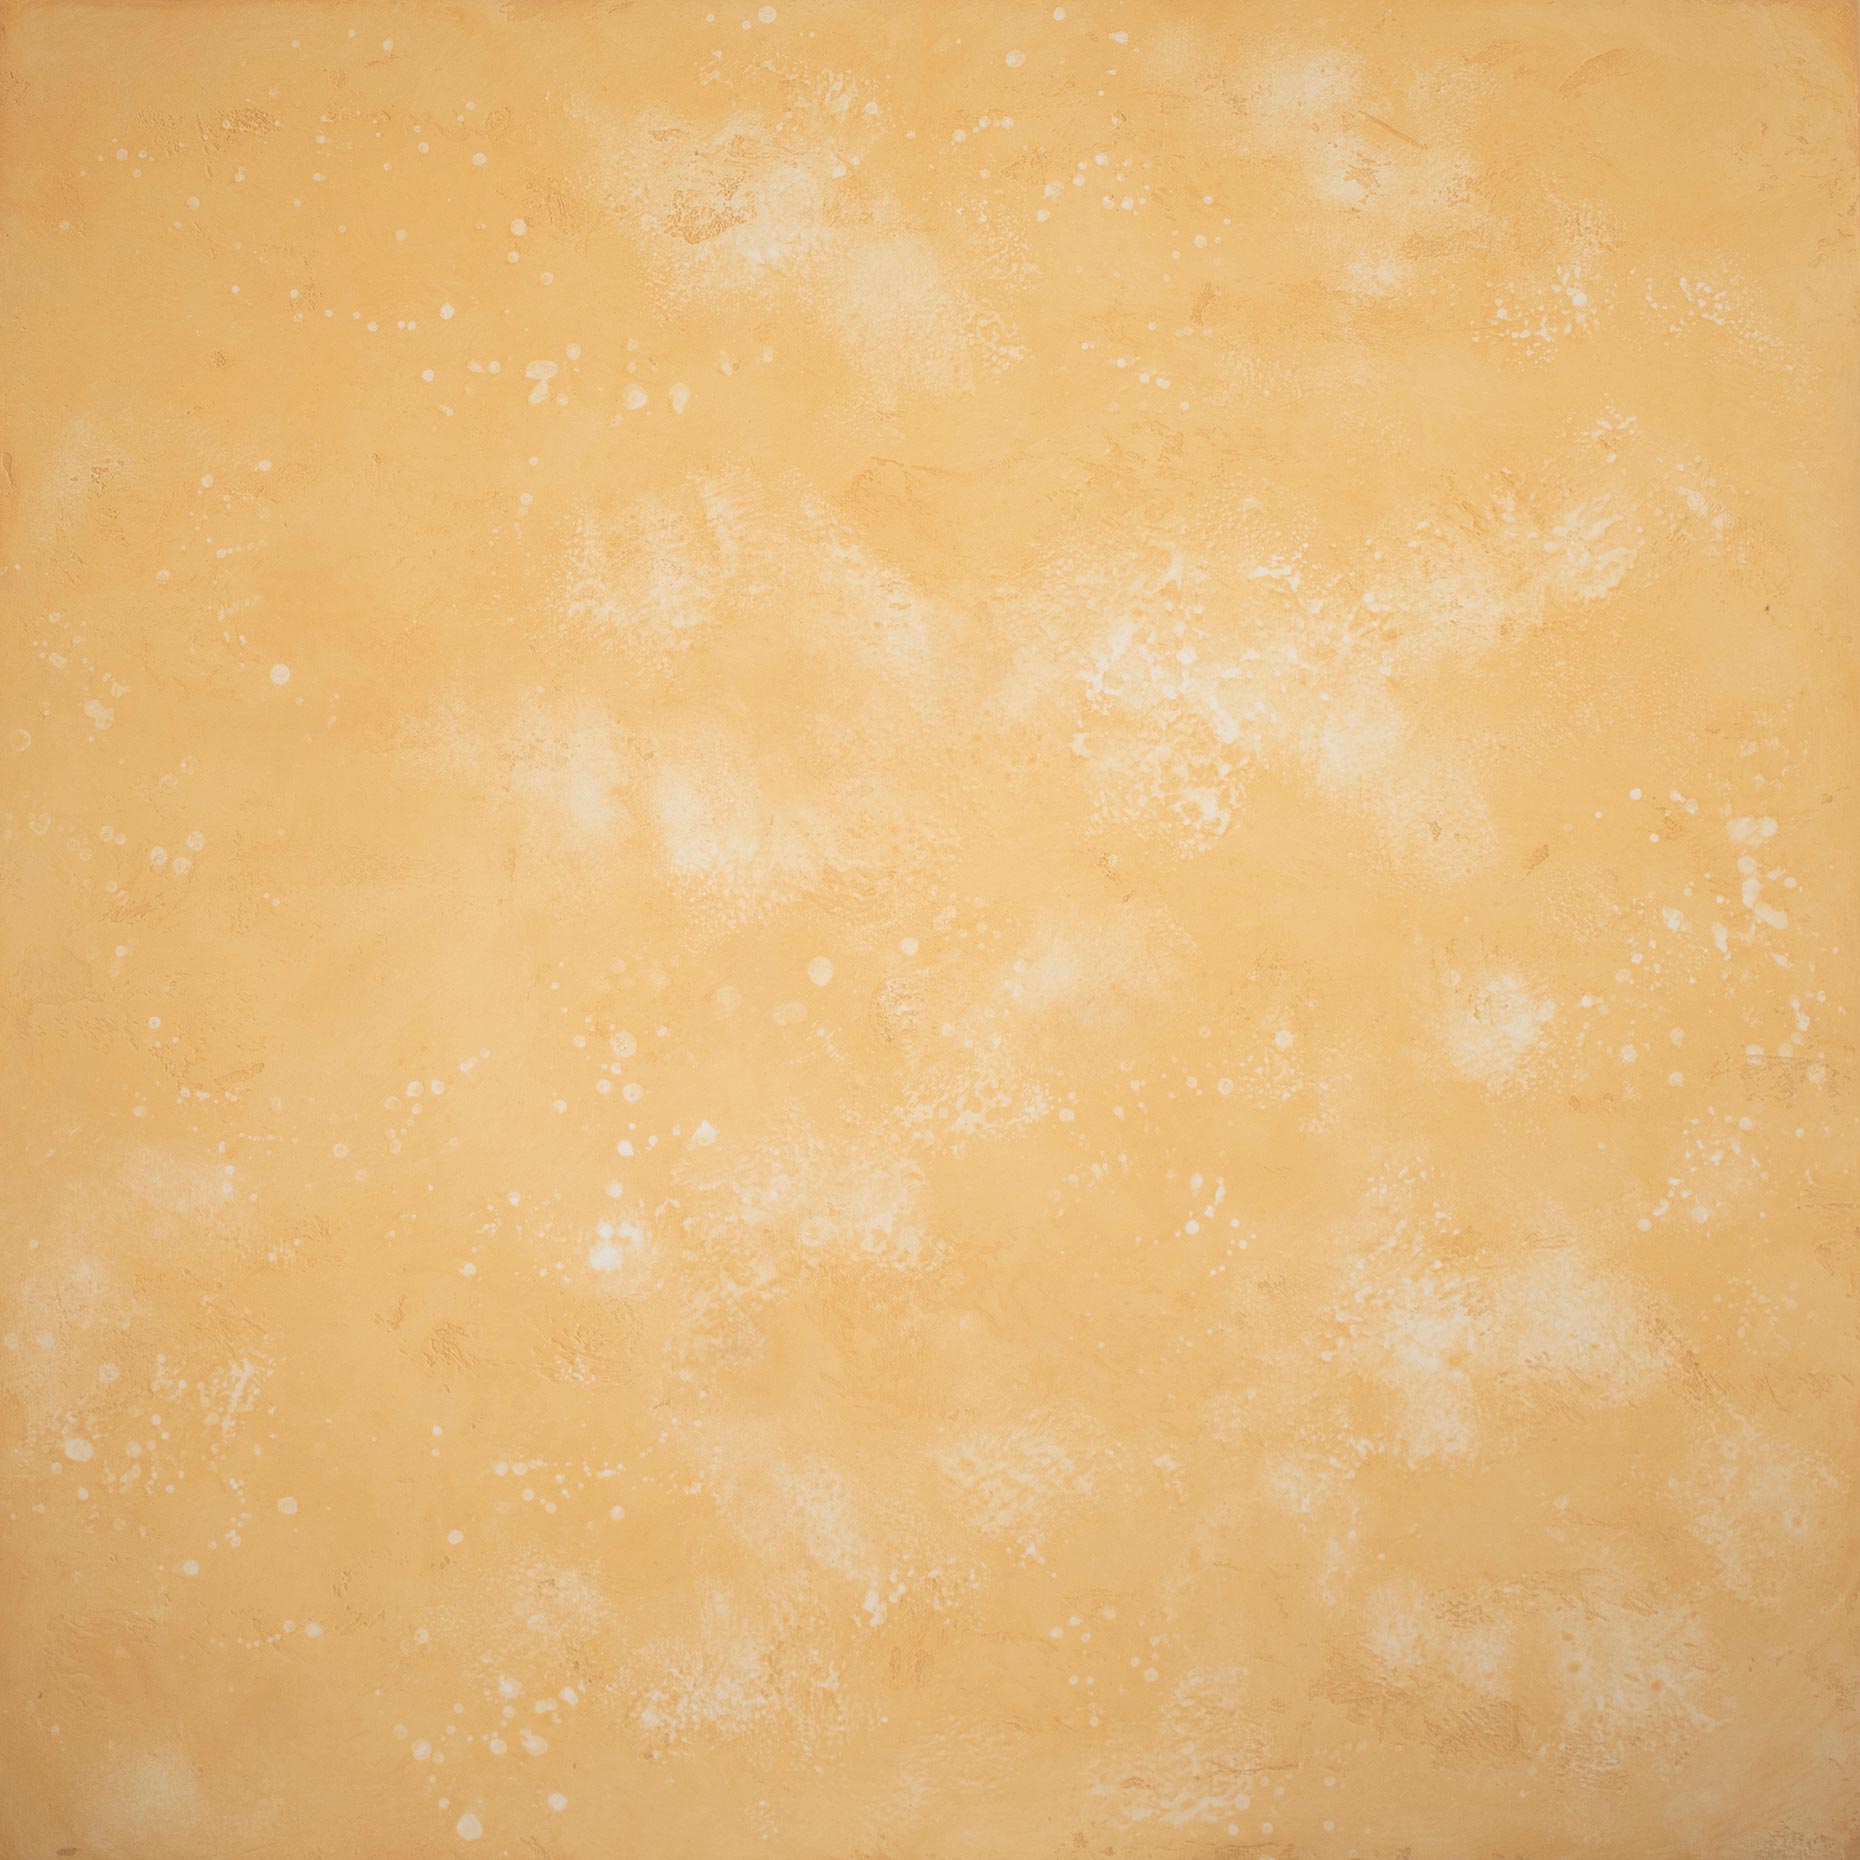 yellow, limed stone background